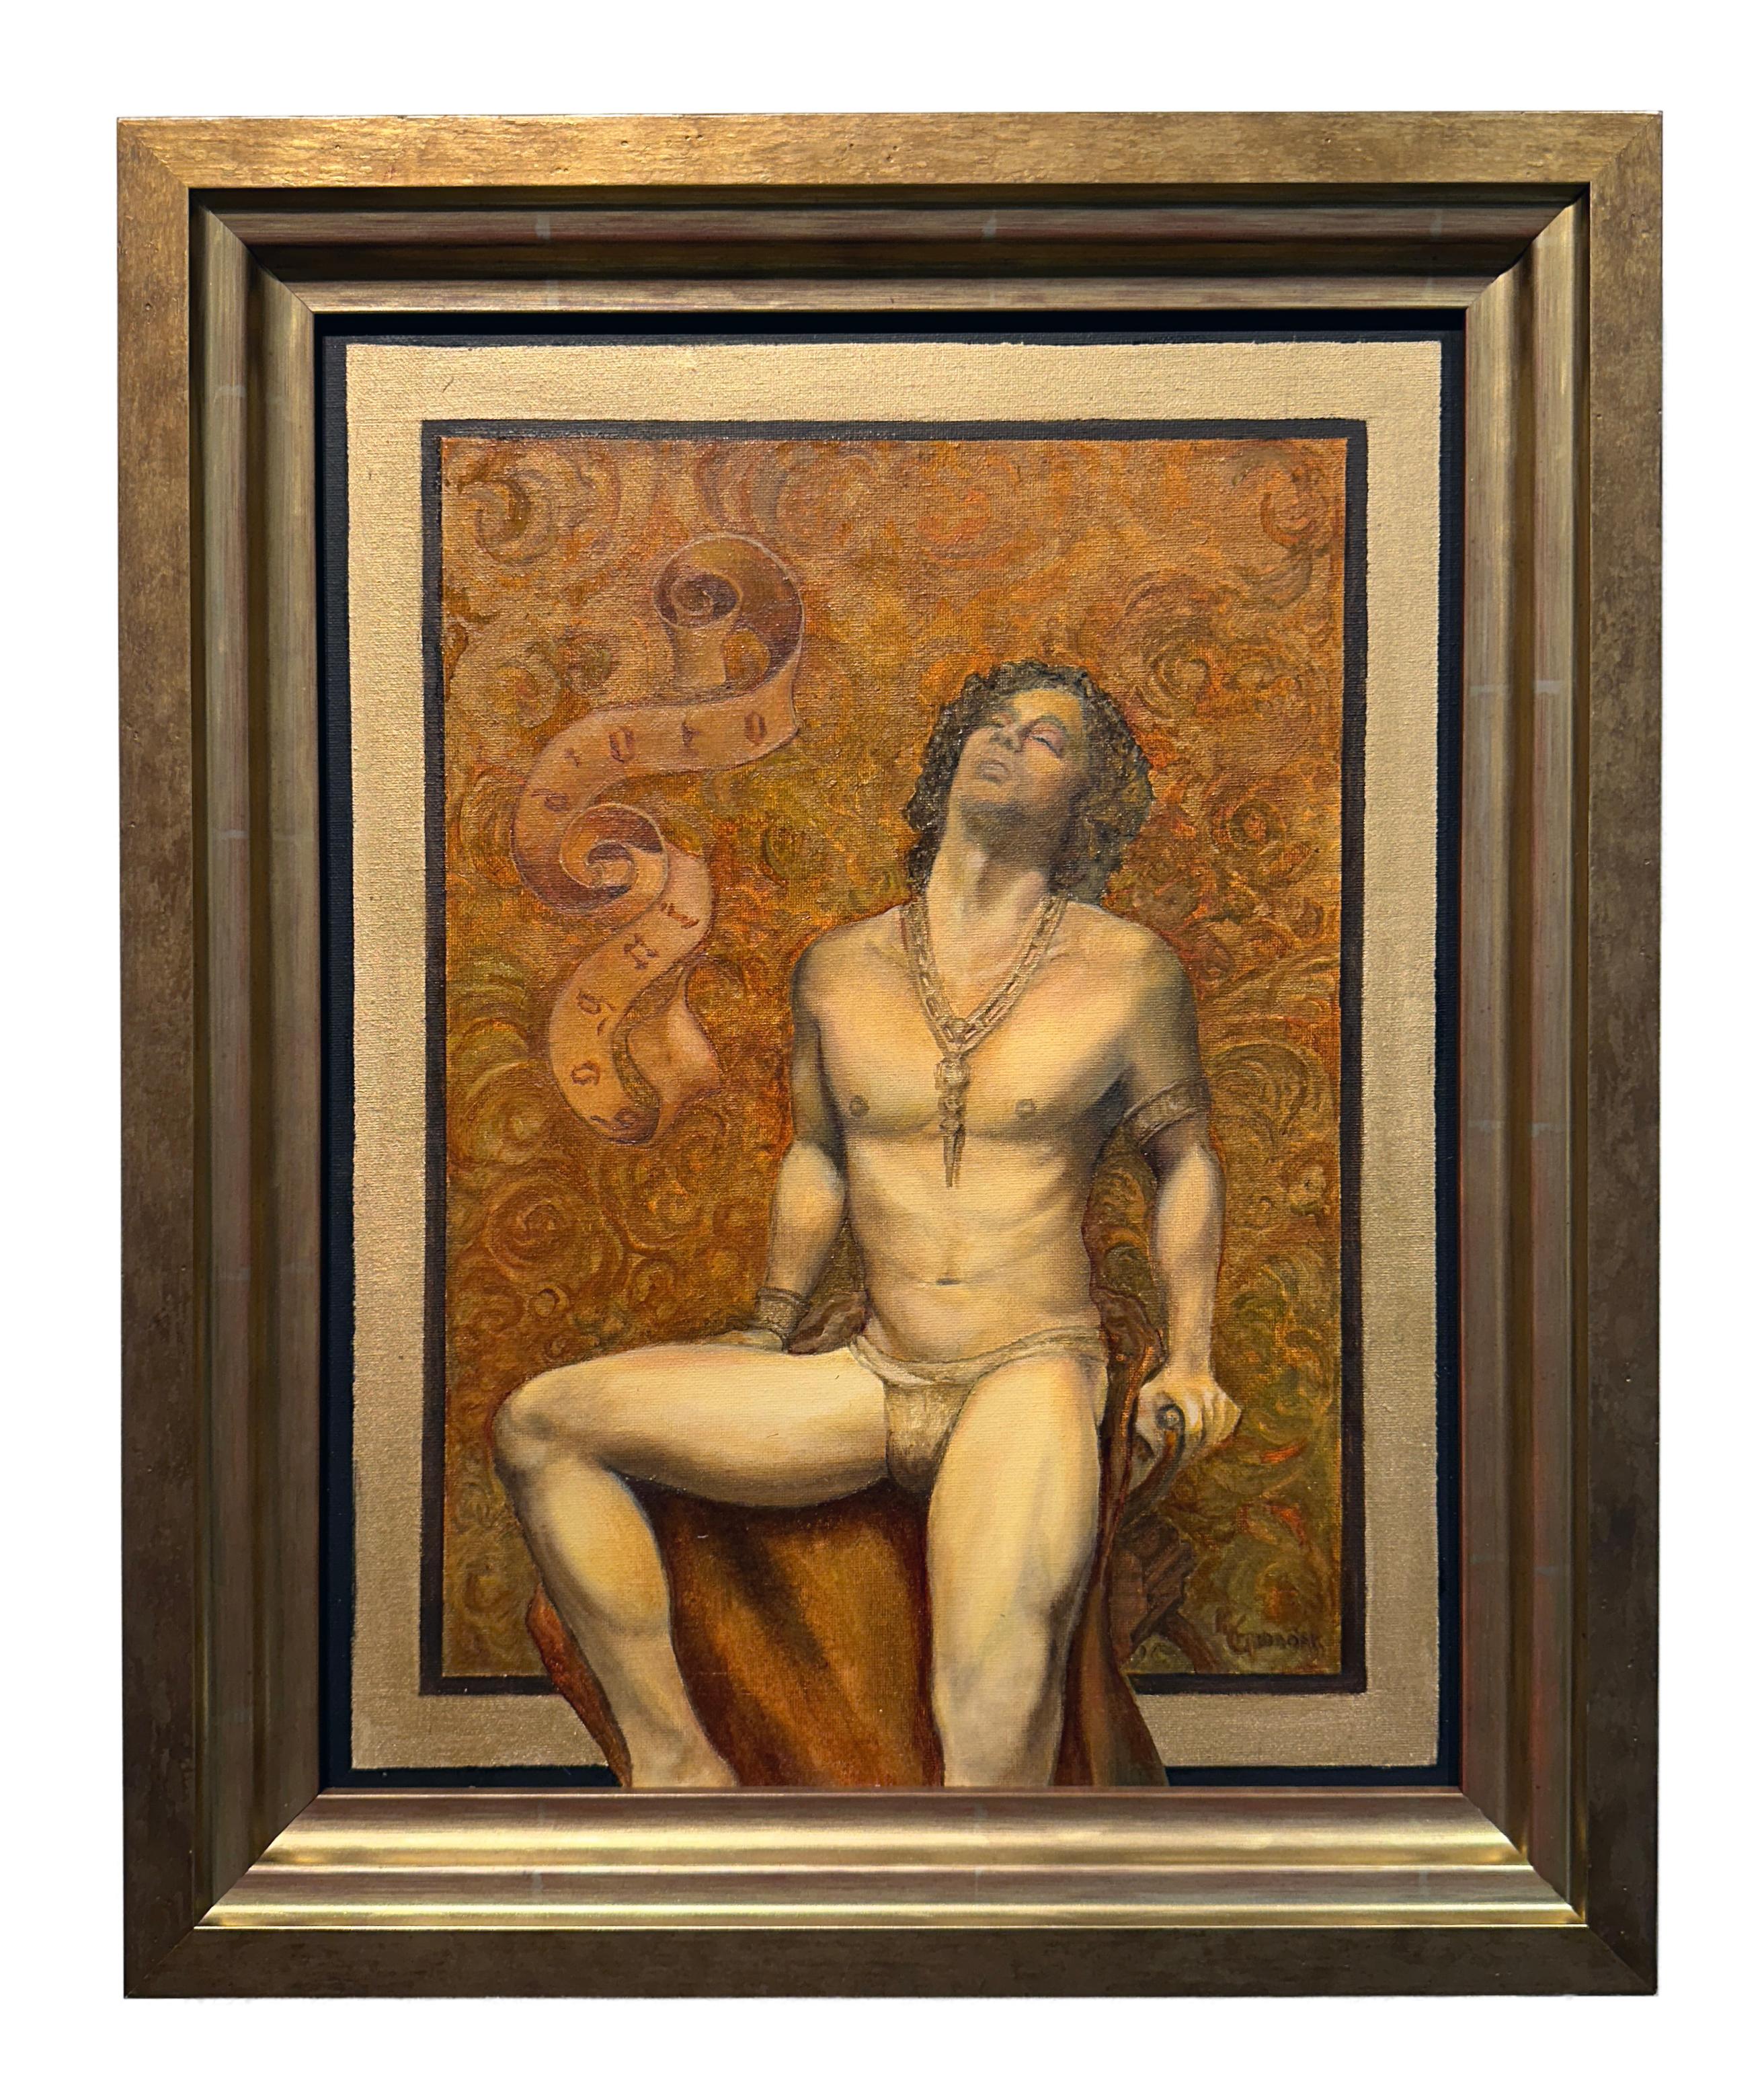 Richard Gibbons Portrait Painting - Sogno D'Oro - Seated Muscular Male Wearing a Loin Cloth, Original Oil on Canvas